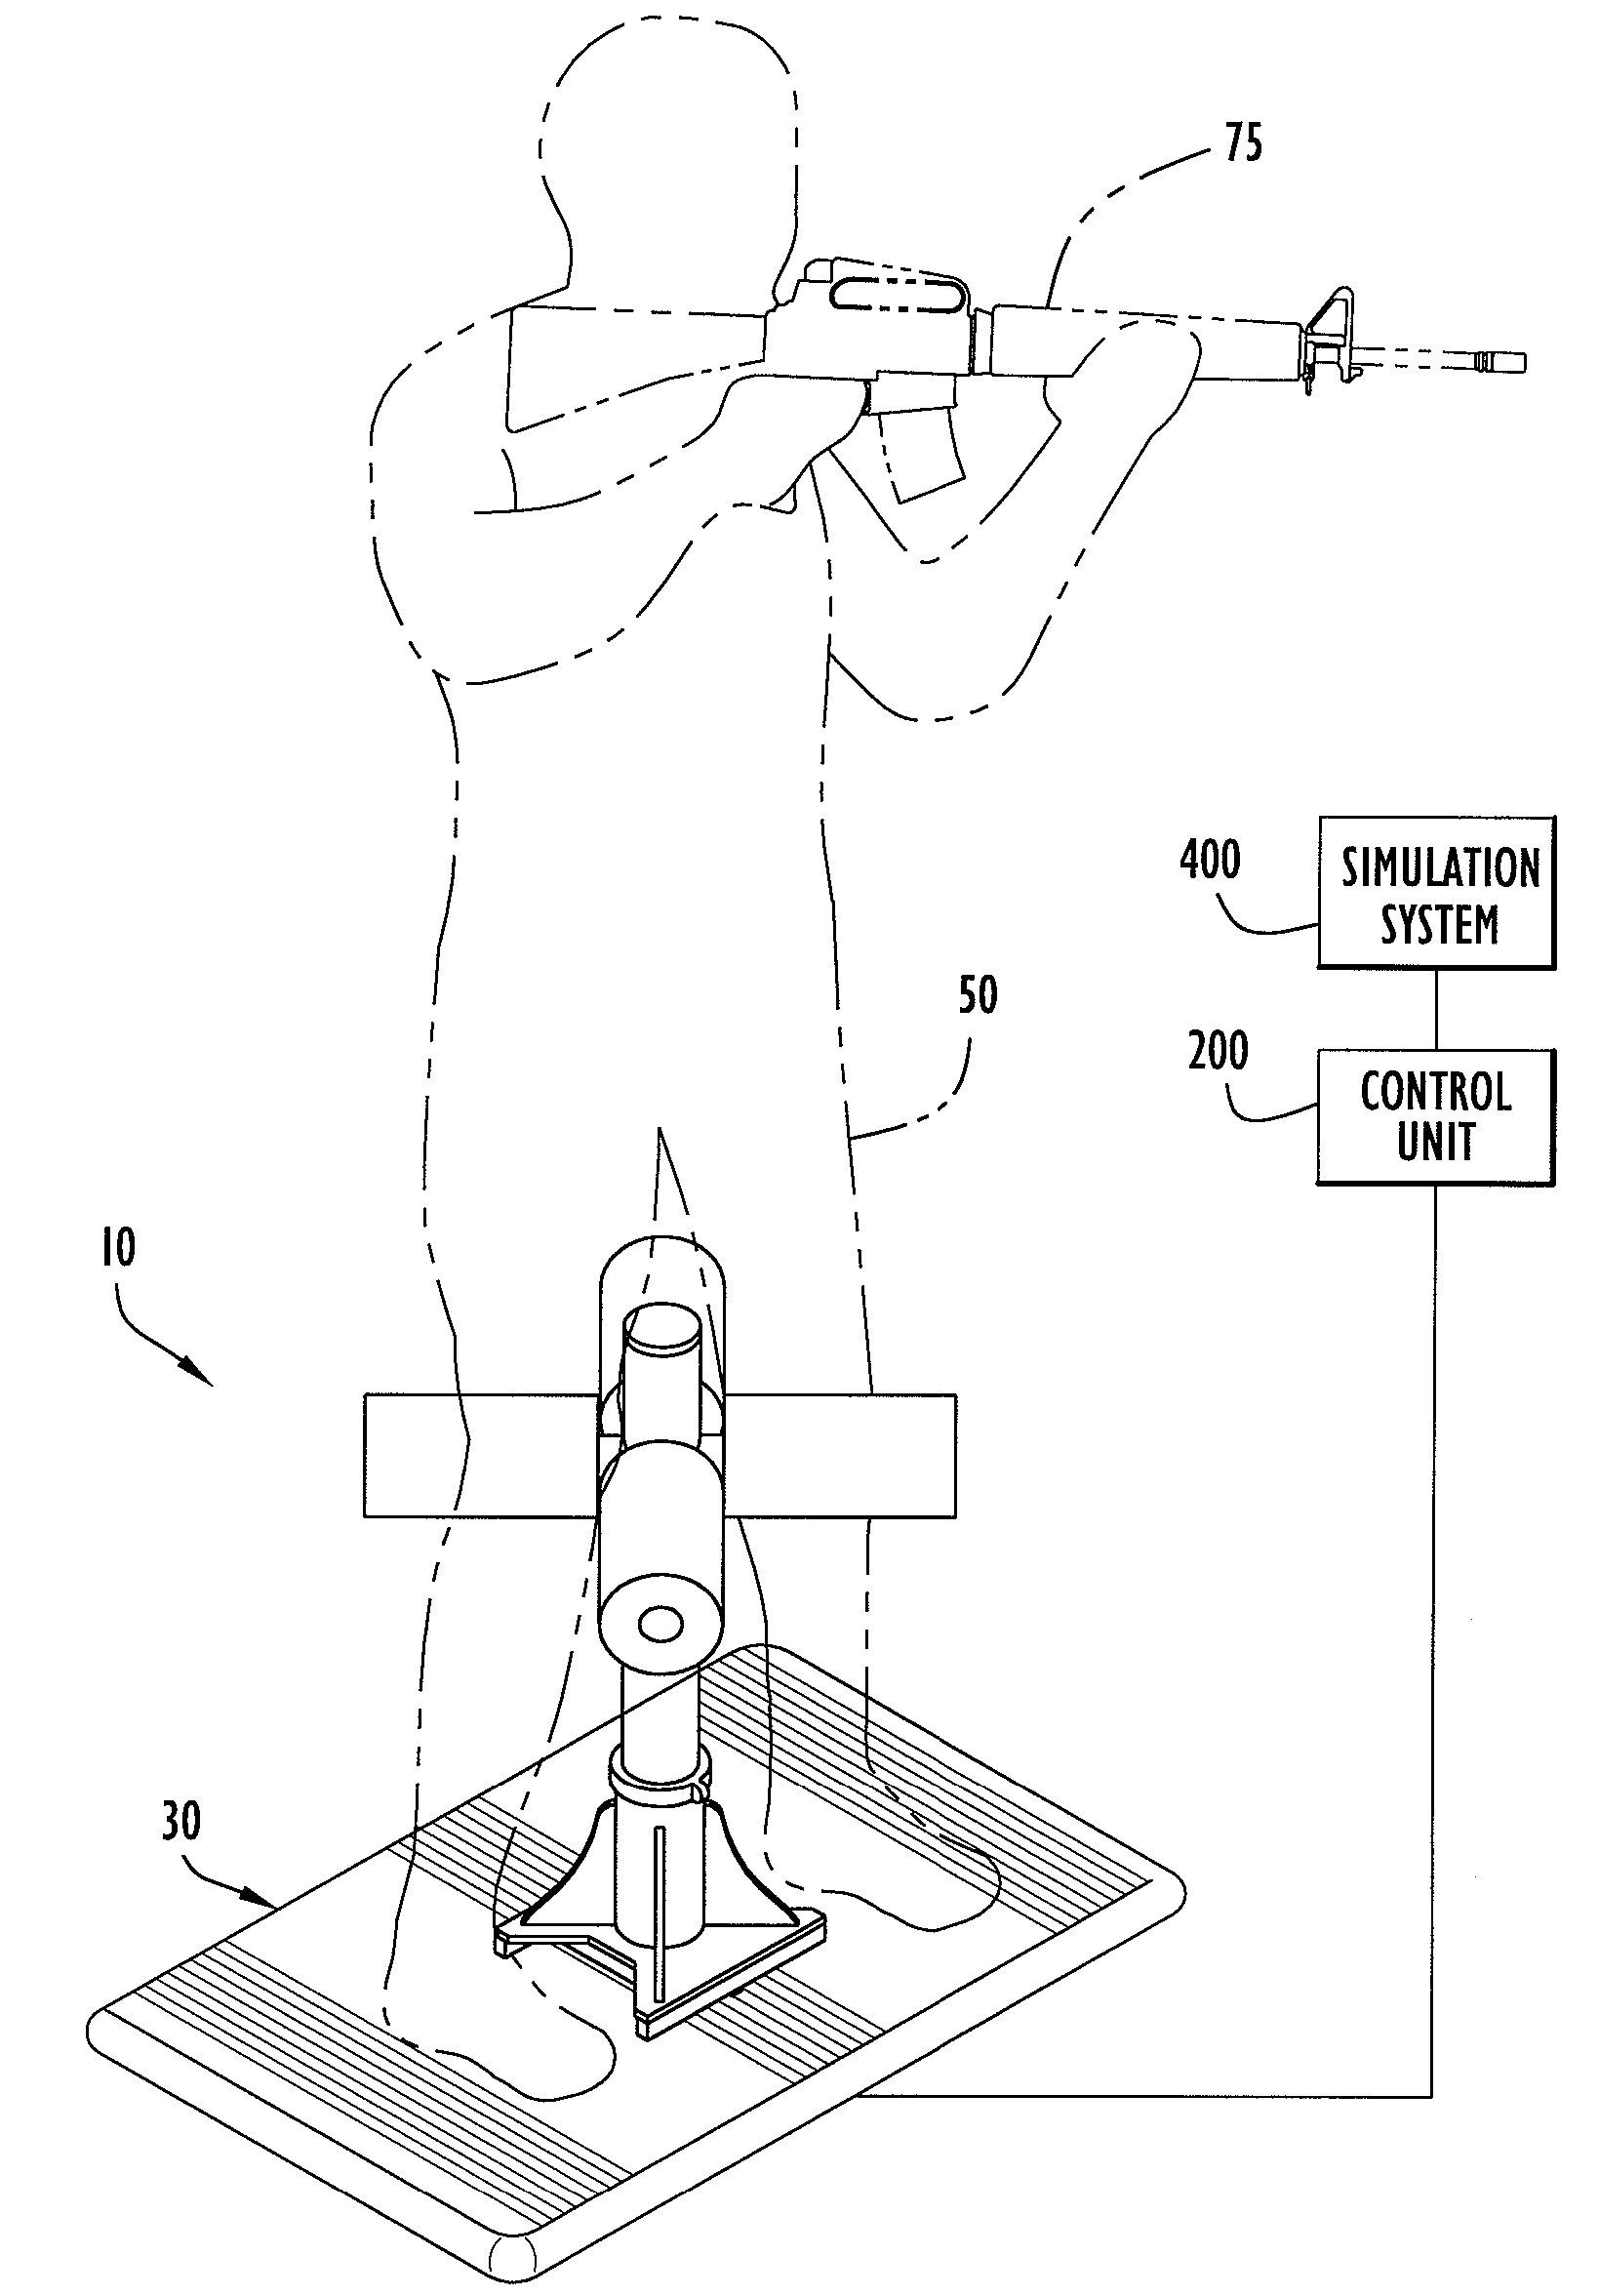 Method and Apparatus for Operatively Controlling a Virtual Reality Scenario in Accordance With Physical Activity of a User